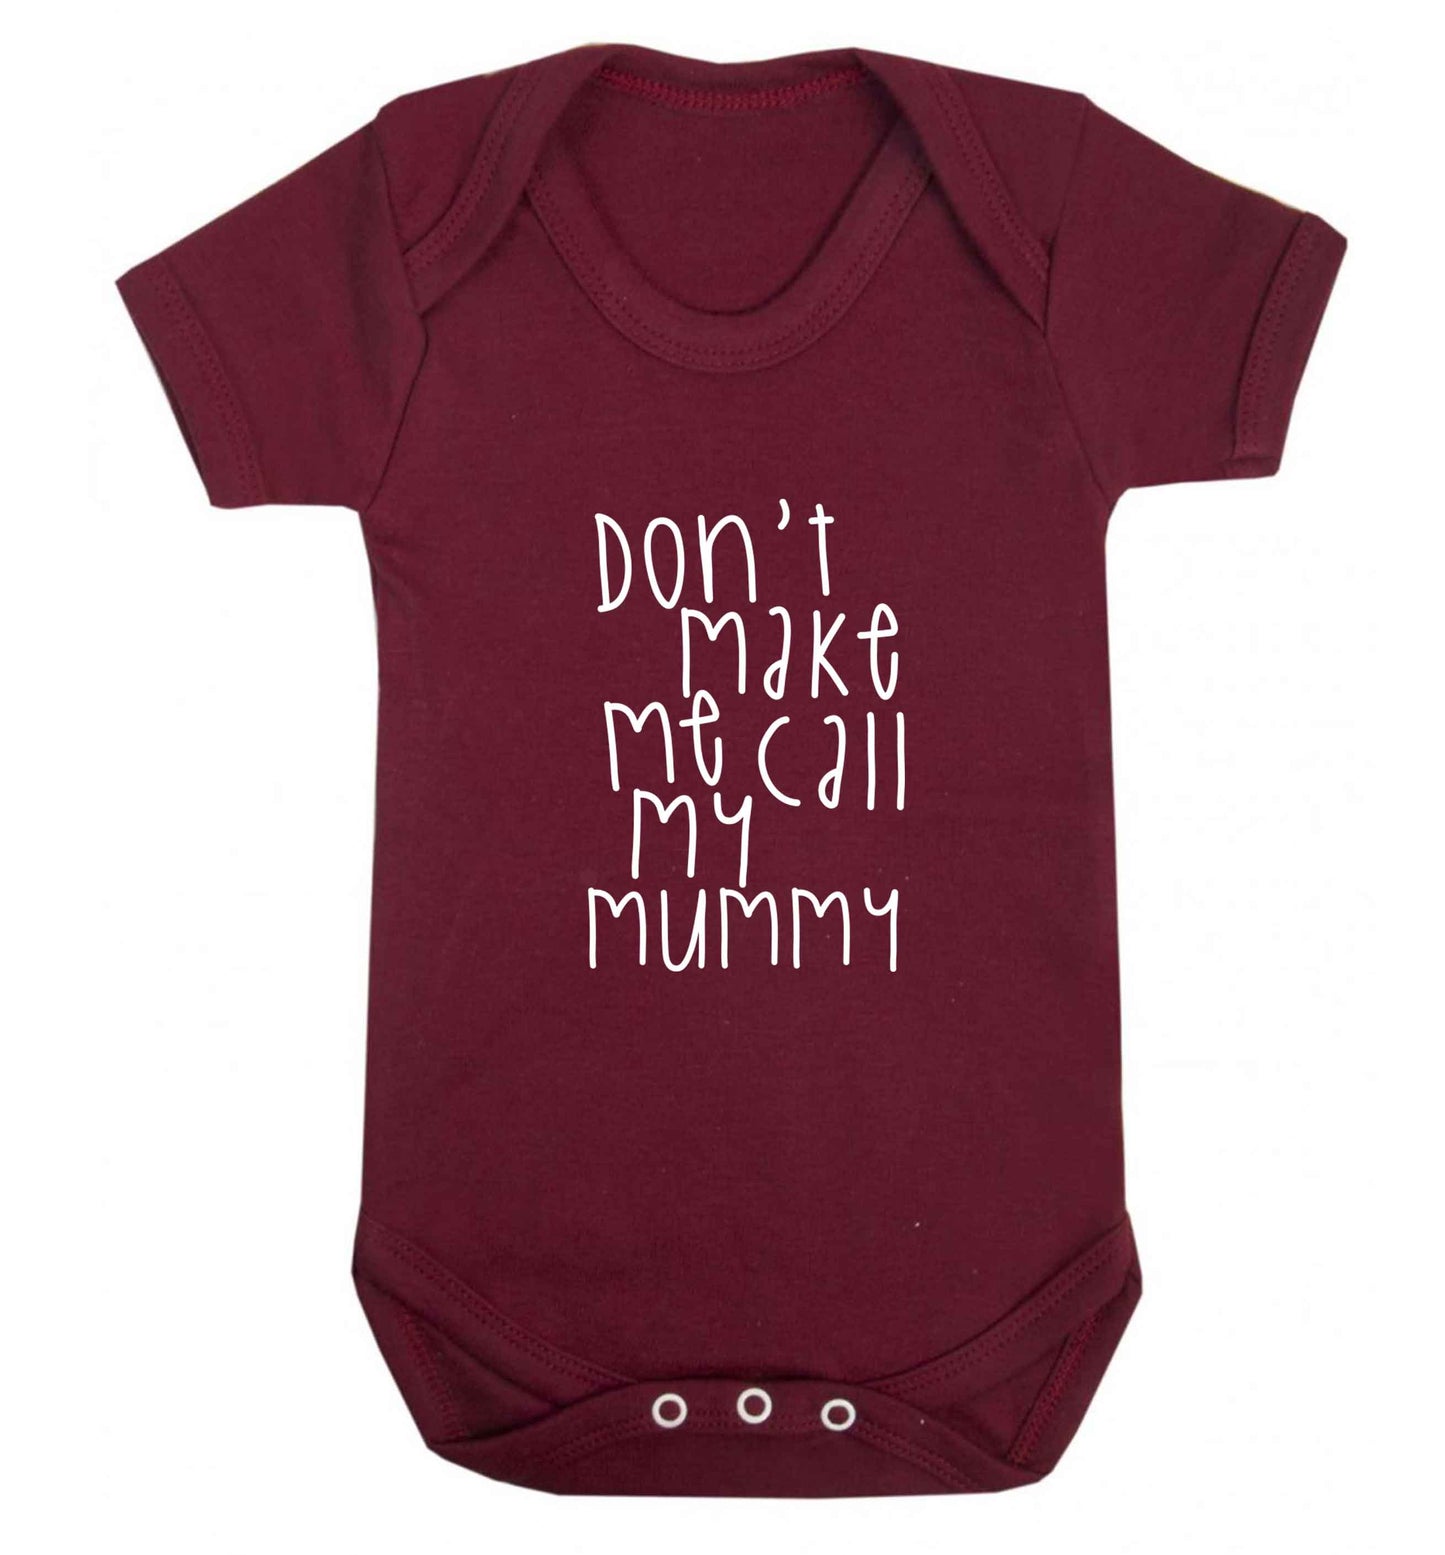 Don't make me call my mummy baby vest maroon 18-24 months